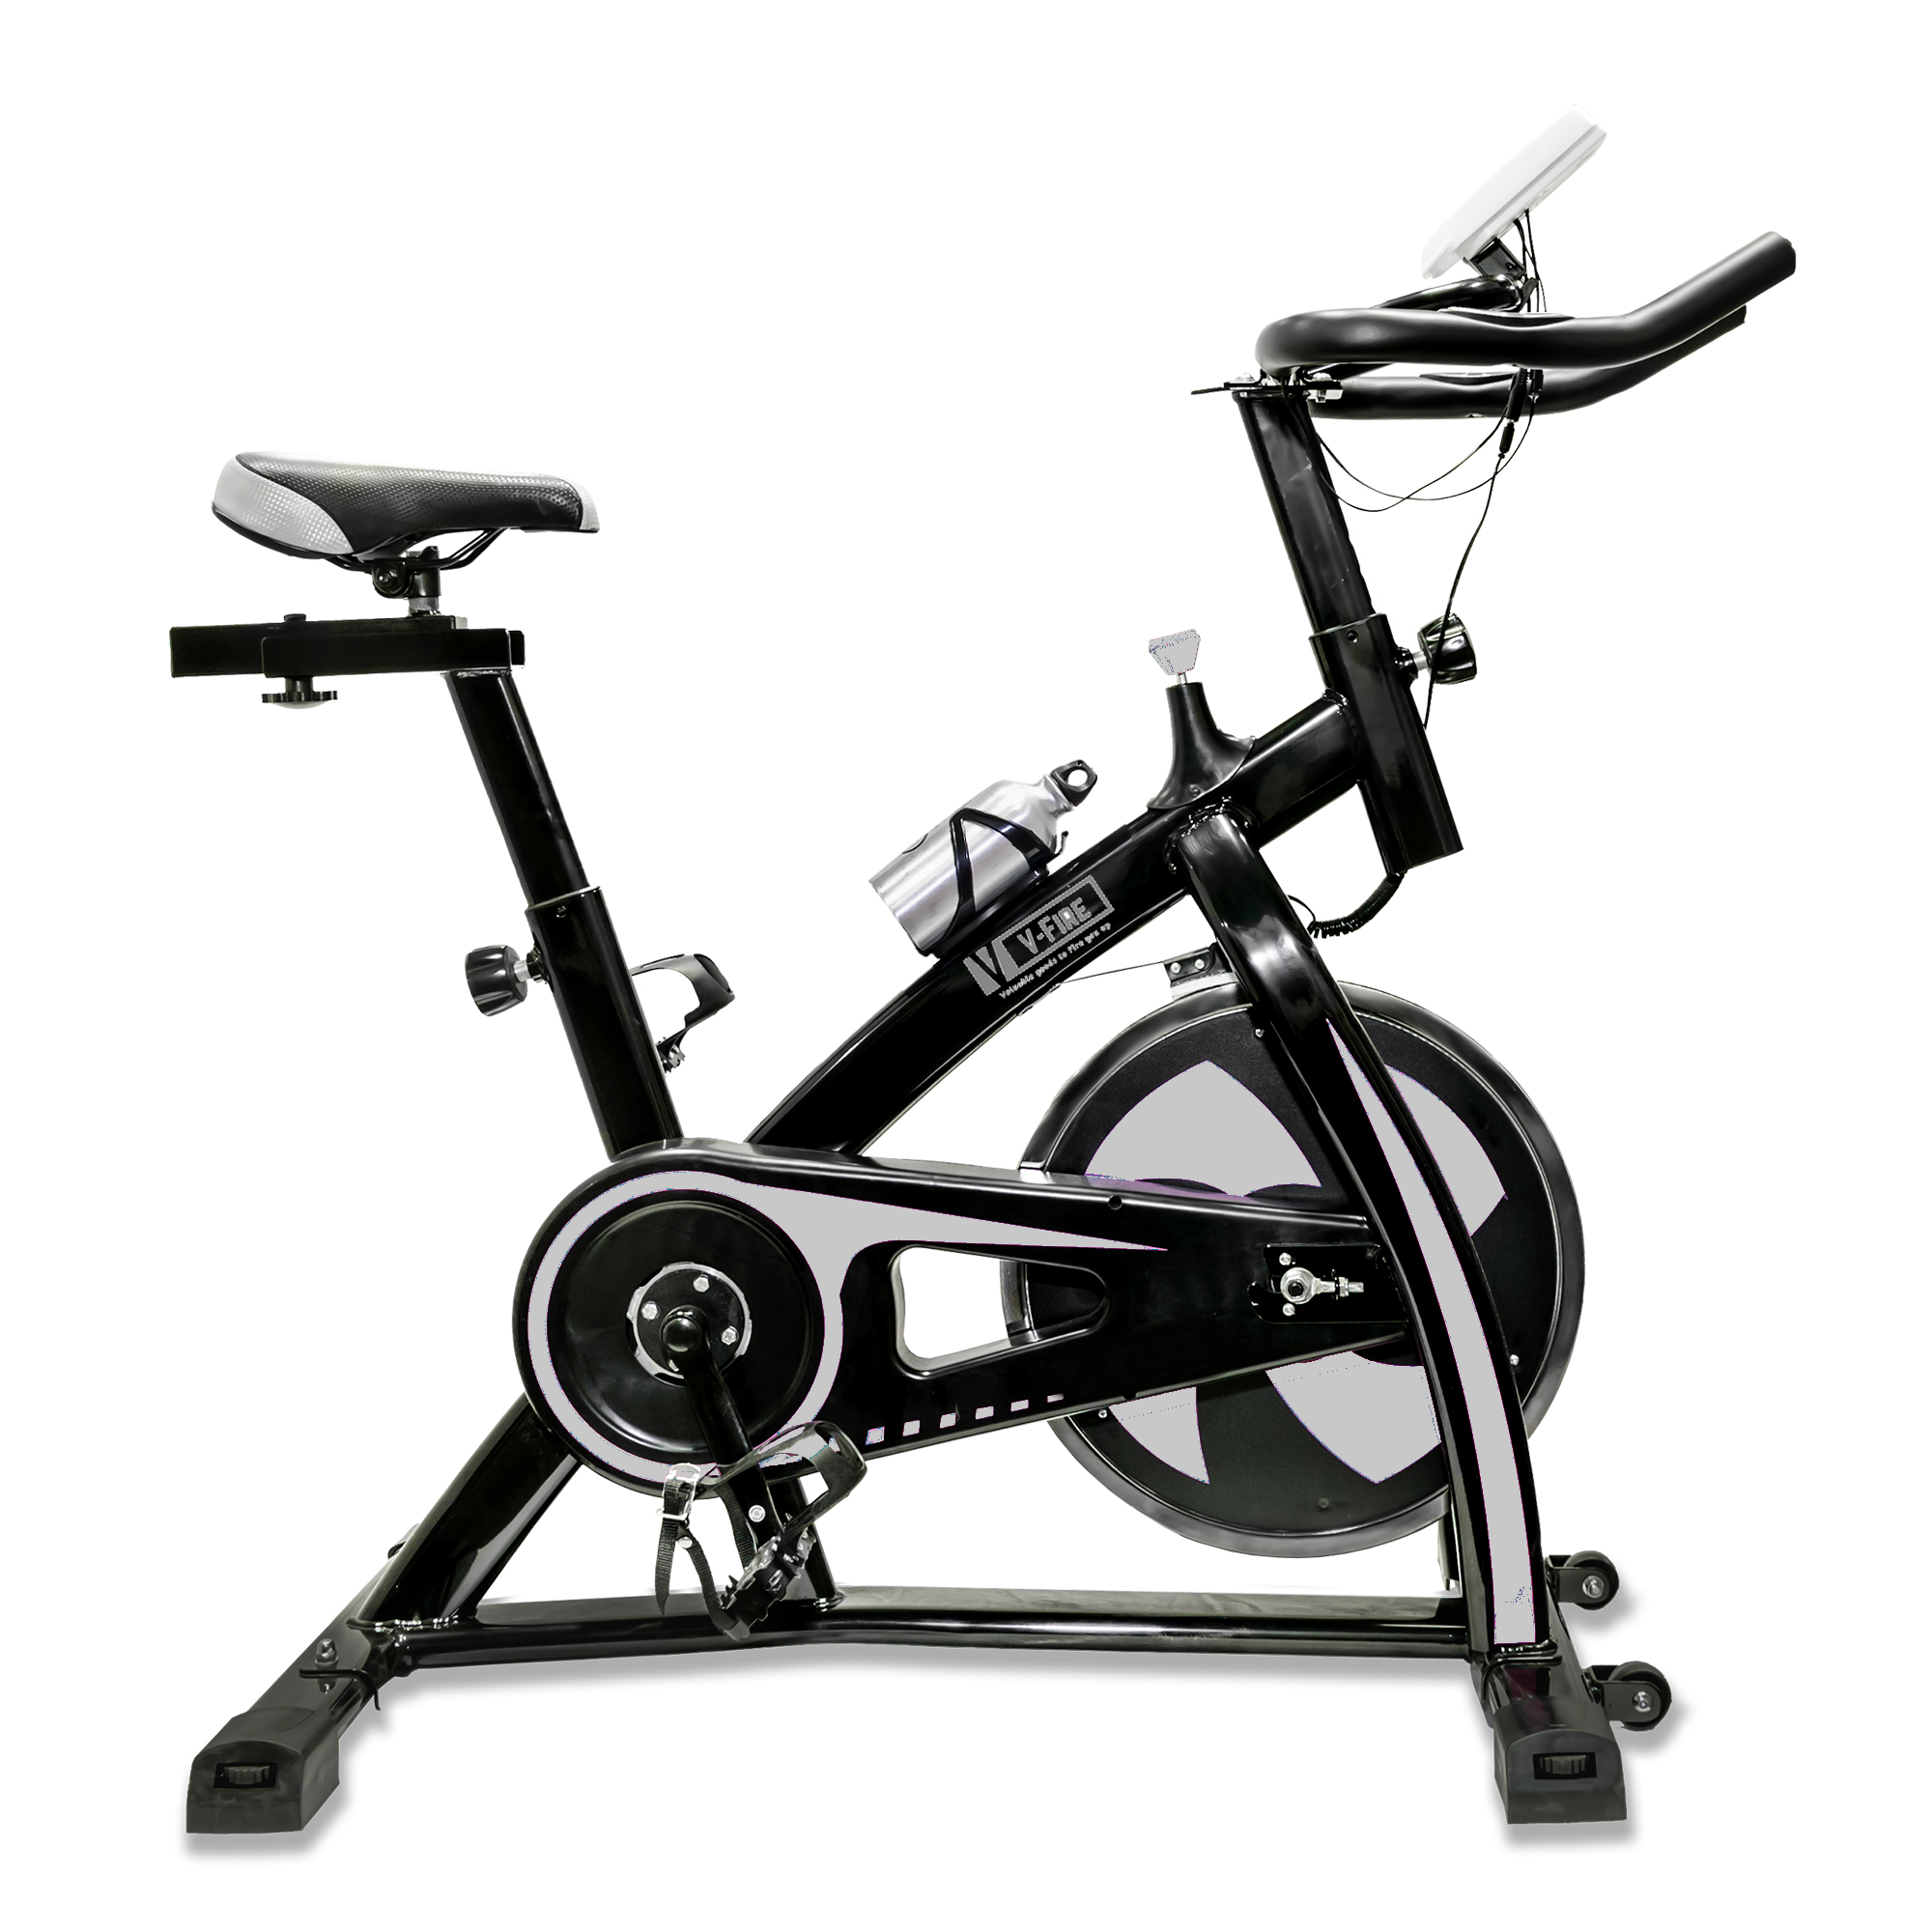 V-FIRE Indoor Training Cycling Workout Fitness Bike